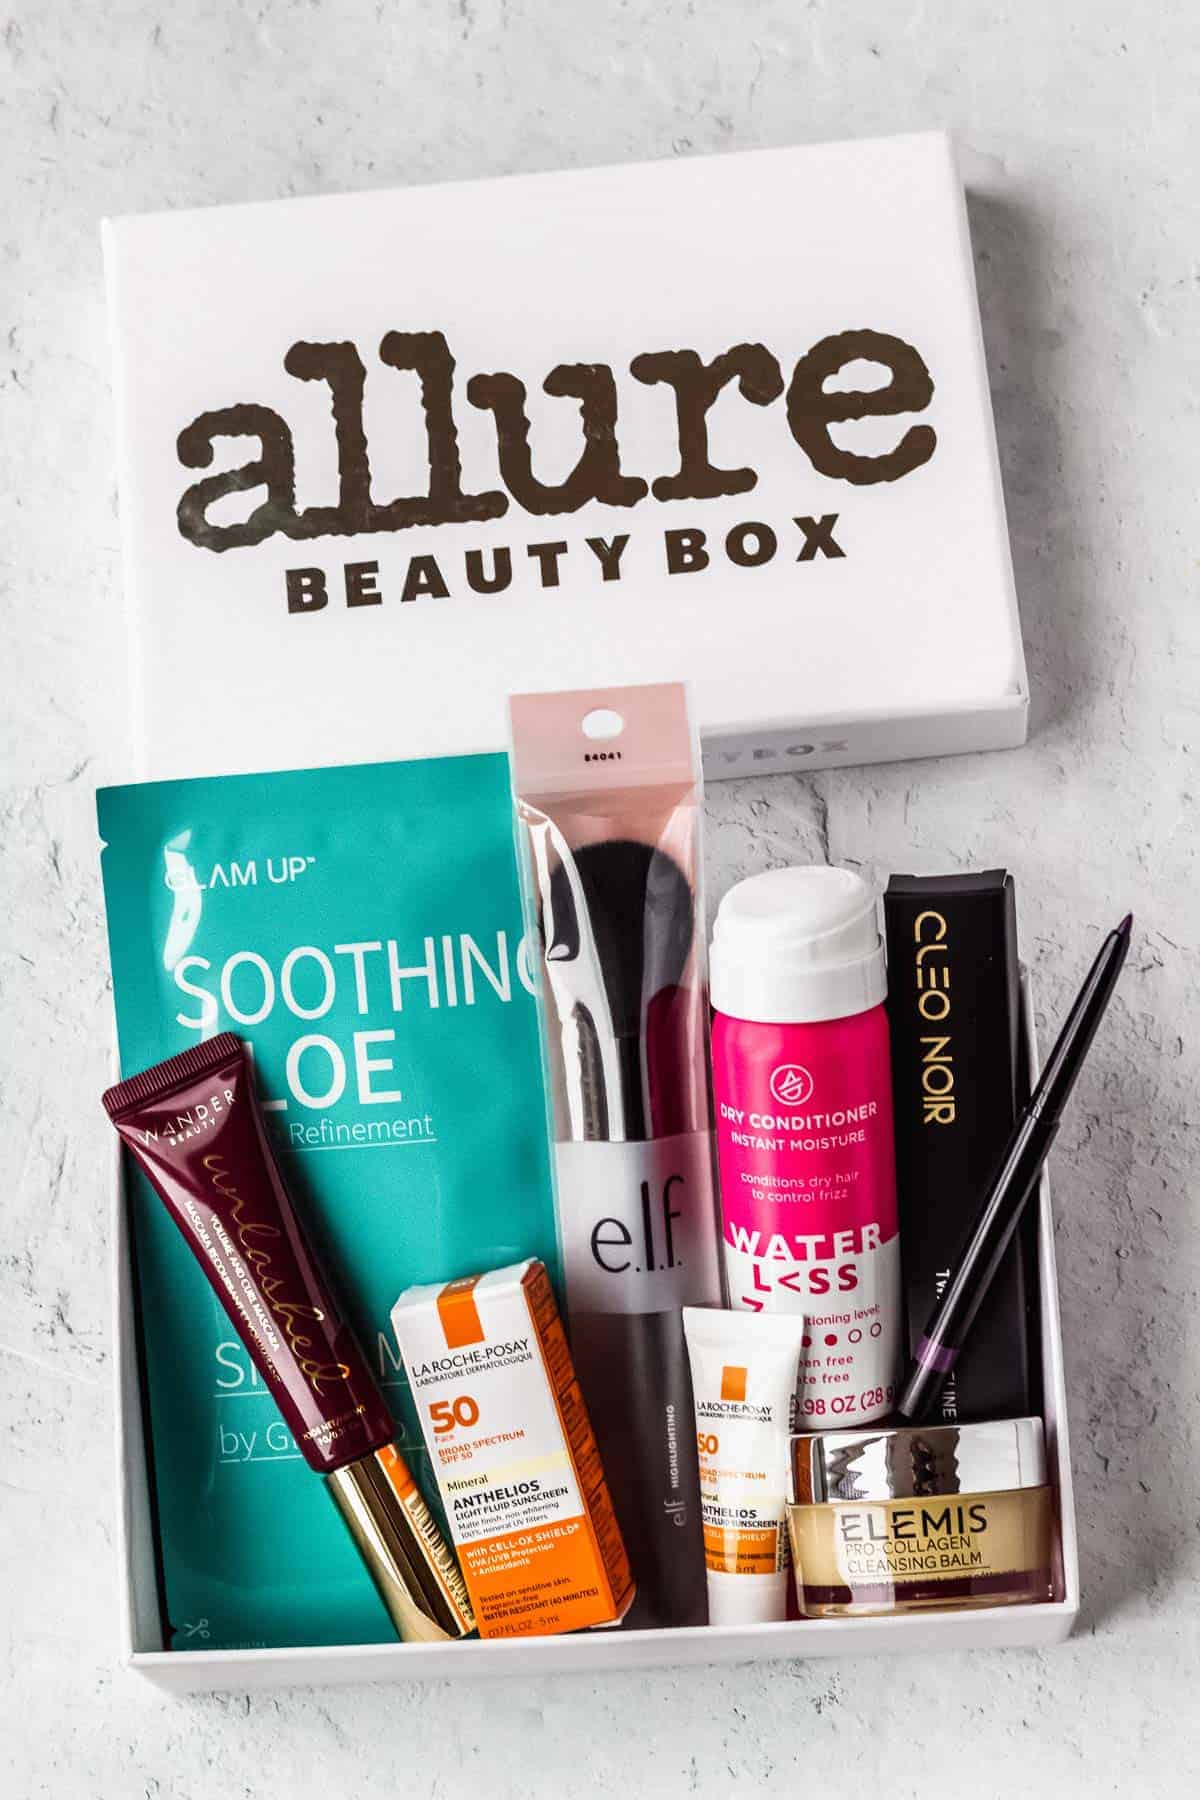 September 2020 Allure Beauty Box contents displayed inside of the box